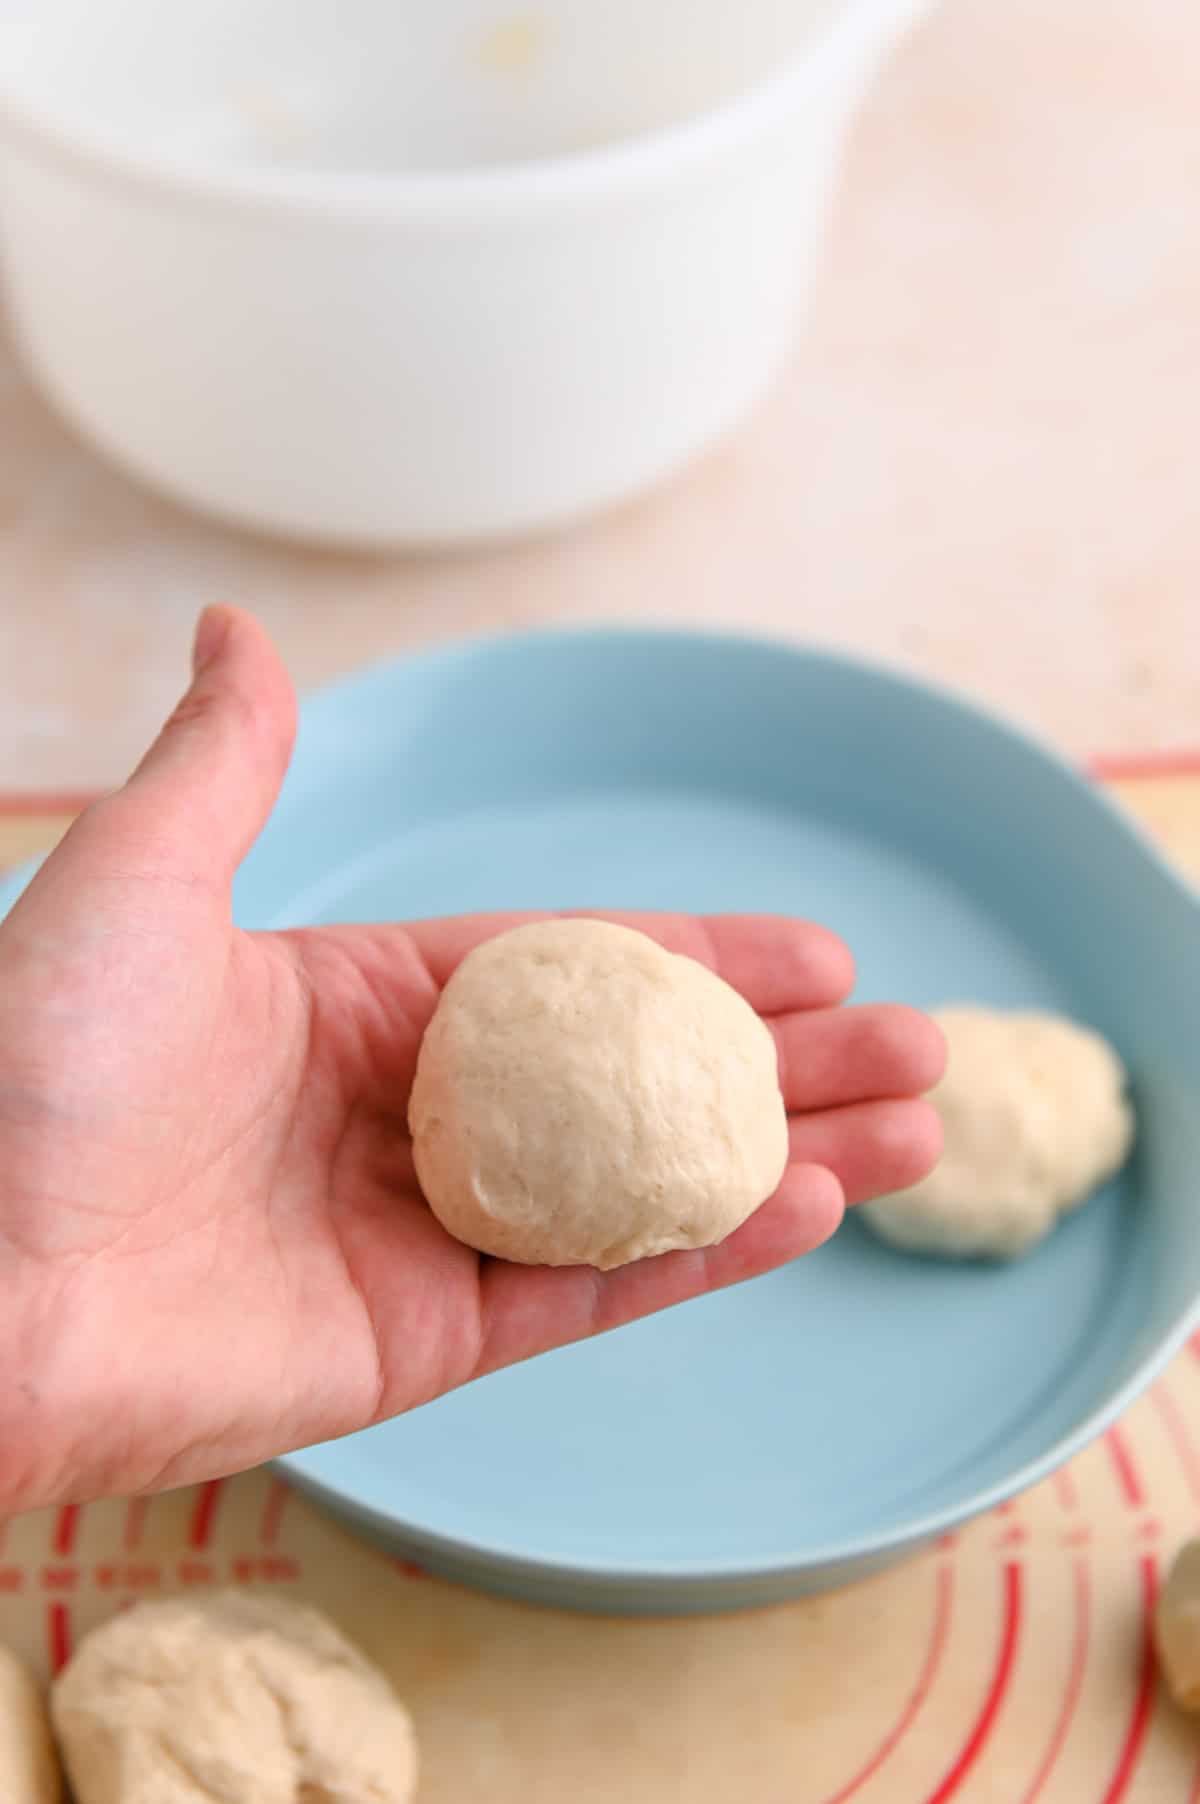 Small white dough ball in a hand in front of a blue dish